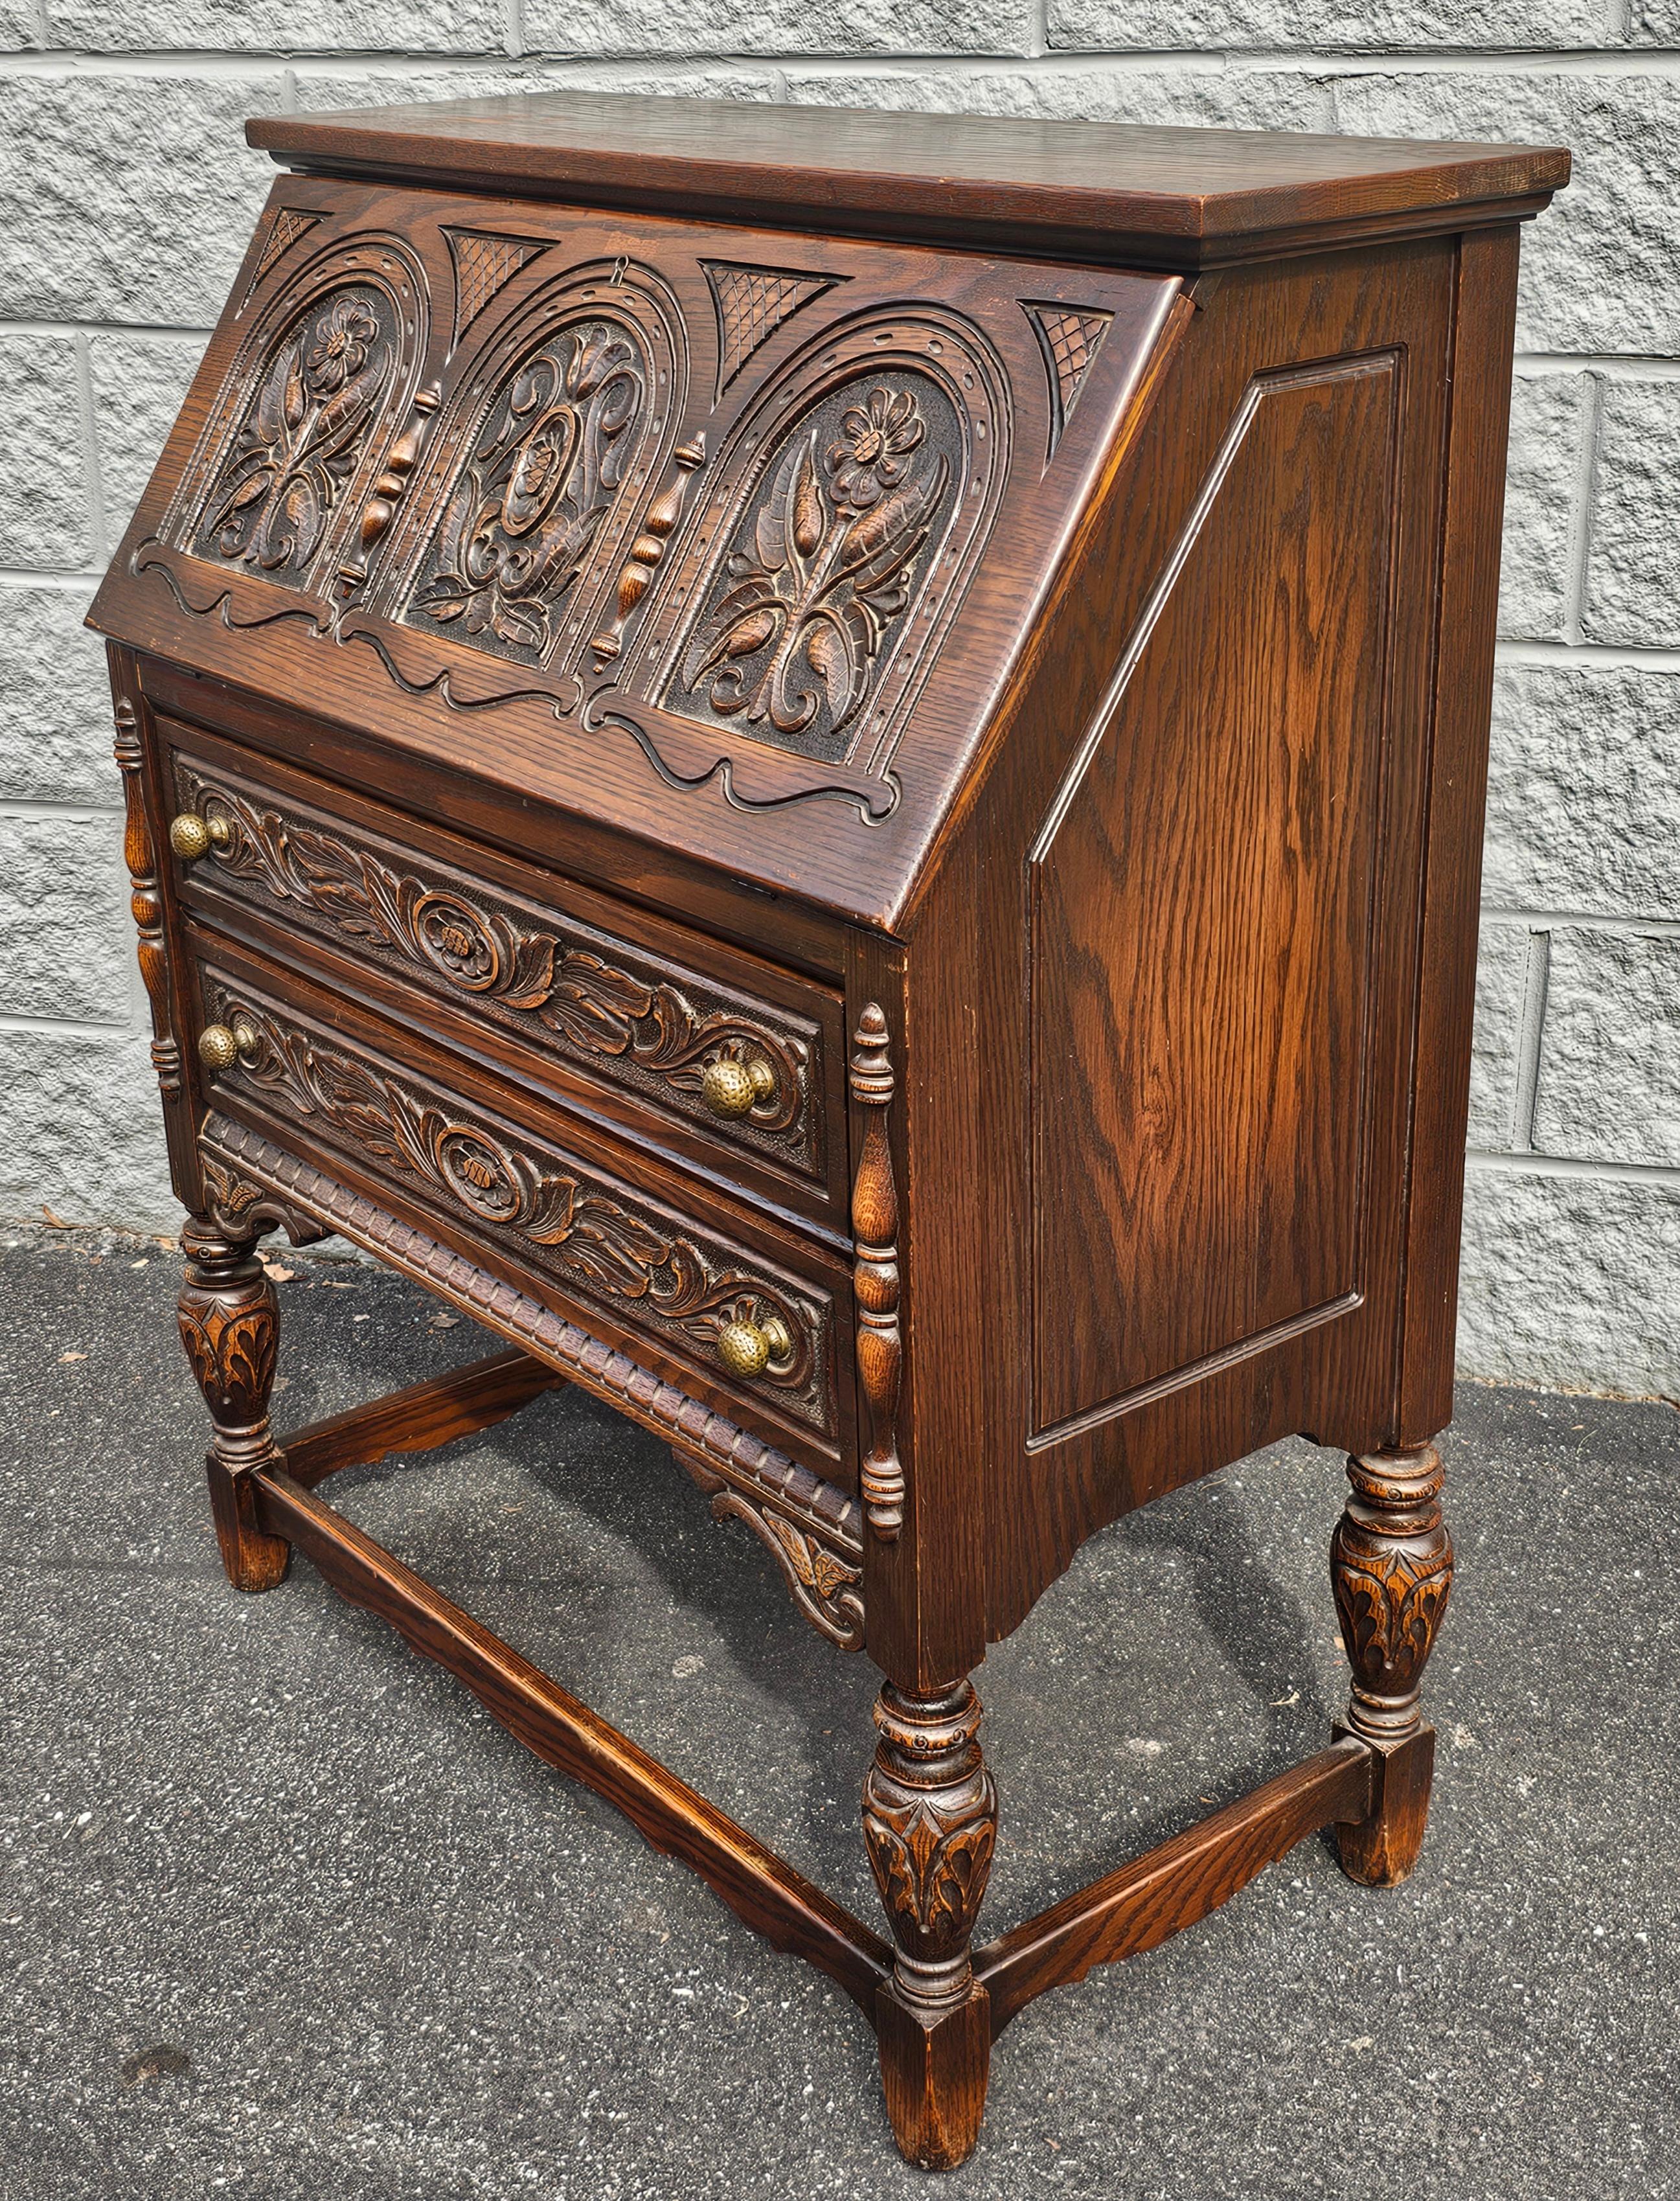 20th Century 1930s Rockford Furniture Jacobean Style Handcrafted Secretary Desk For Sale